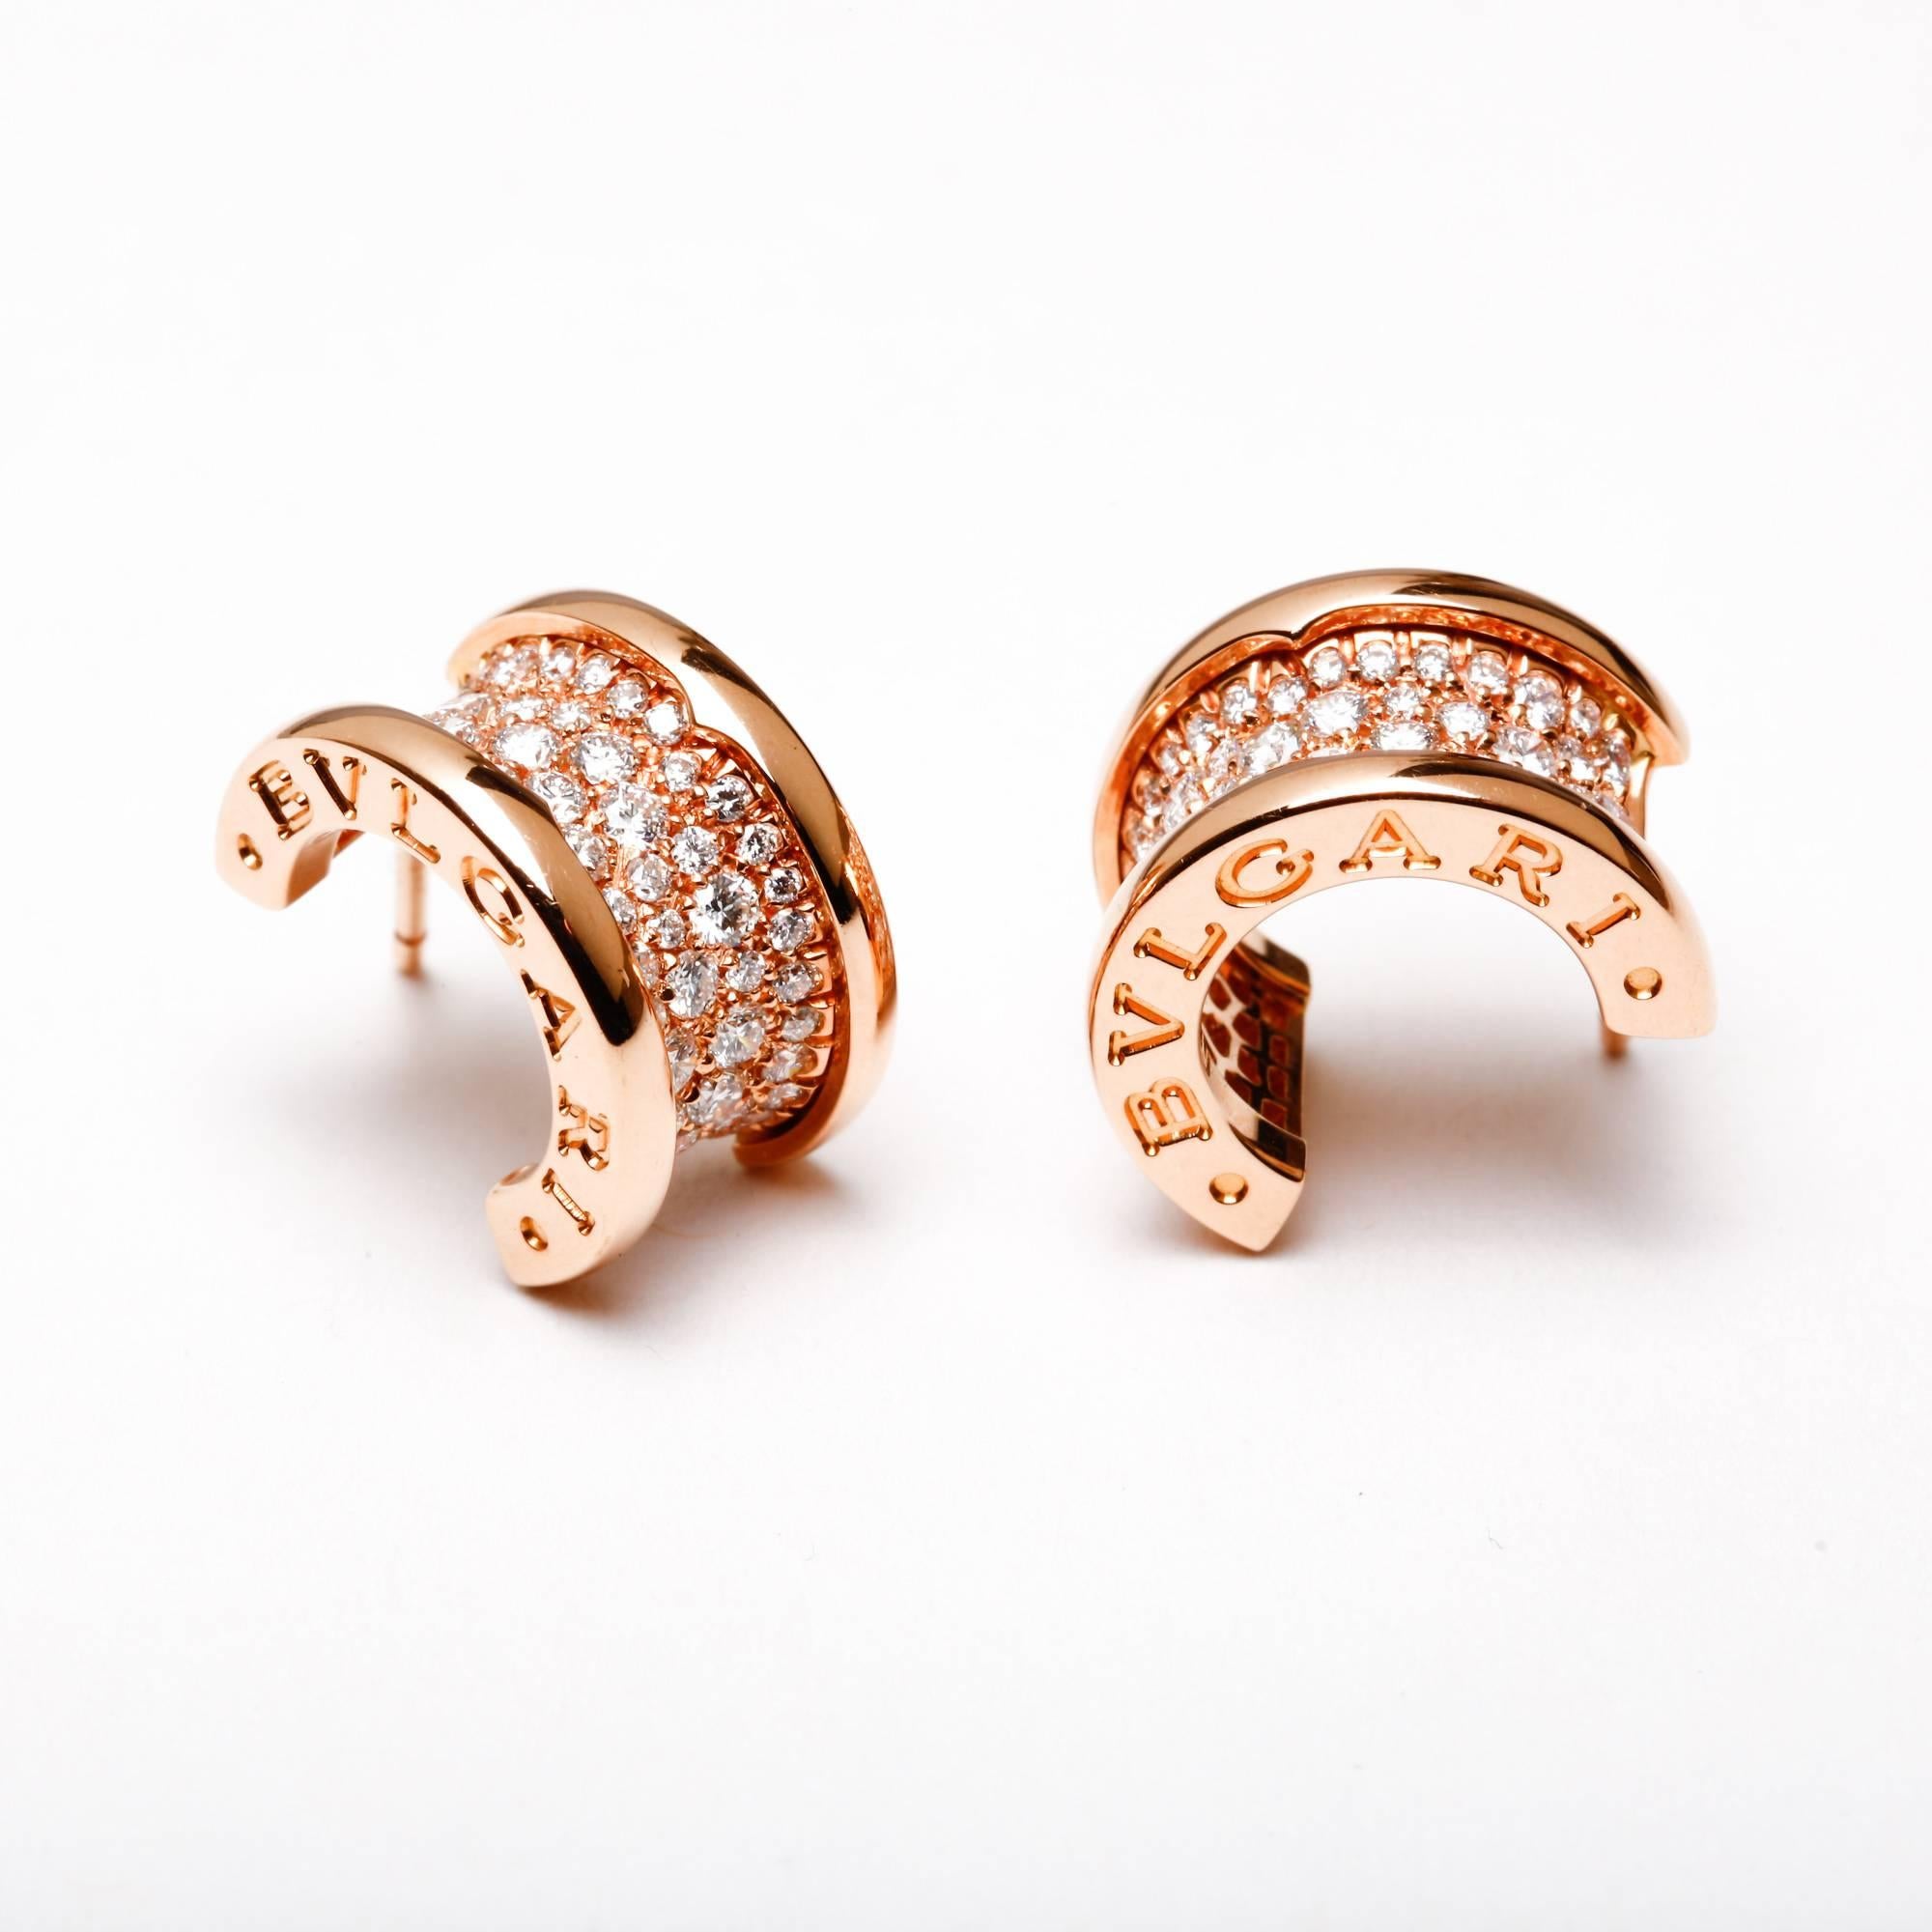 Inspired by the Colosseum in Rome, these 18k rose gold and 1.12 ct. pavé diamond Bulgari B.zero1 